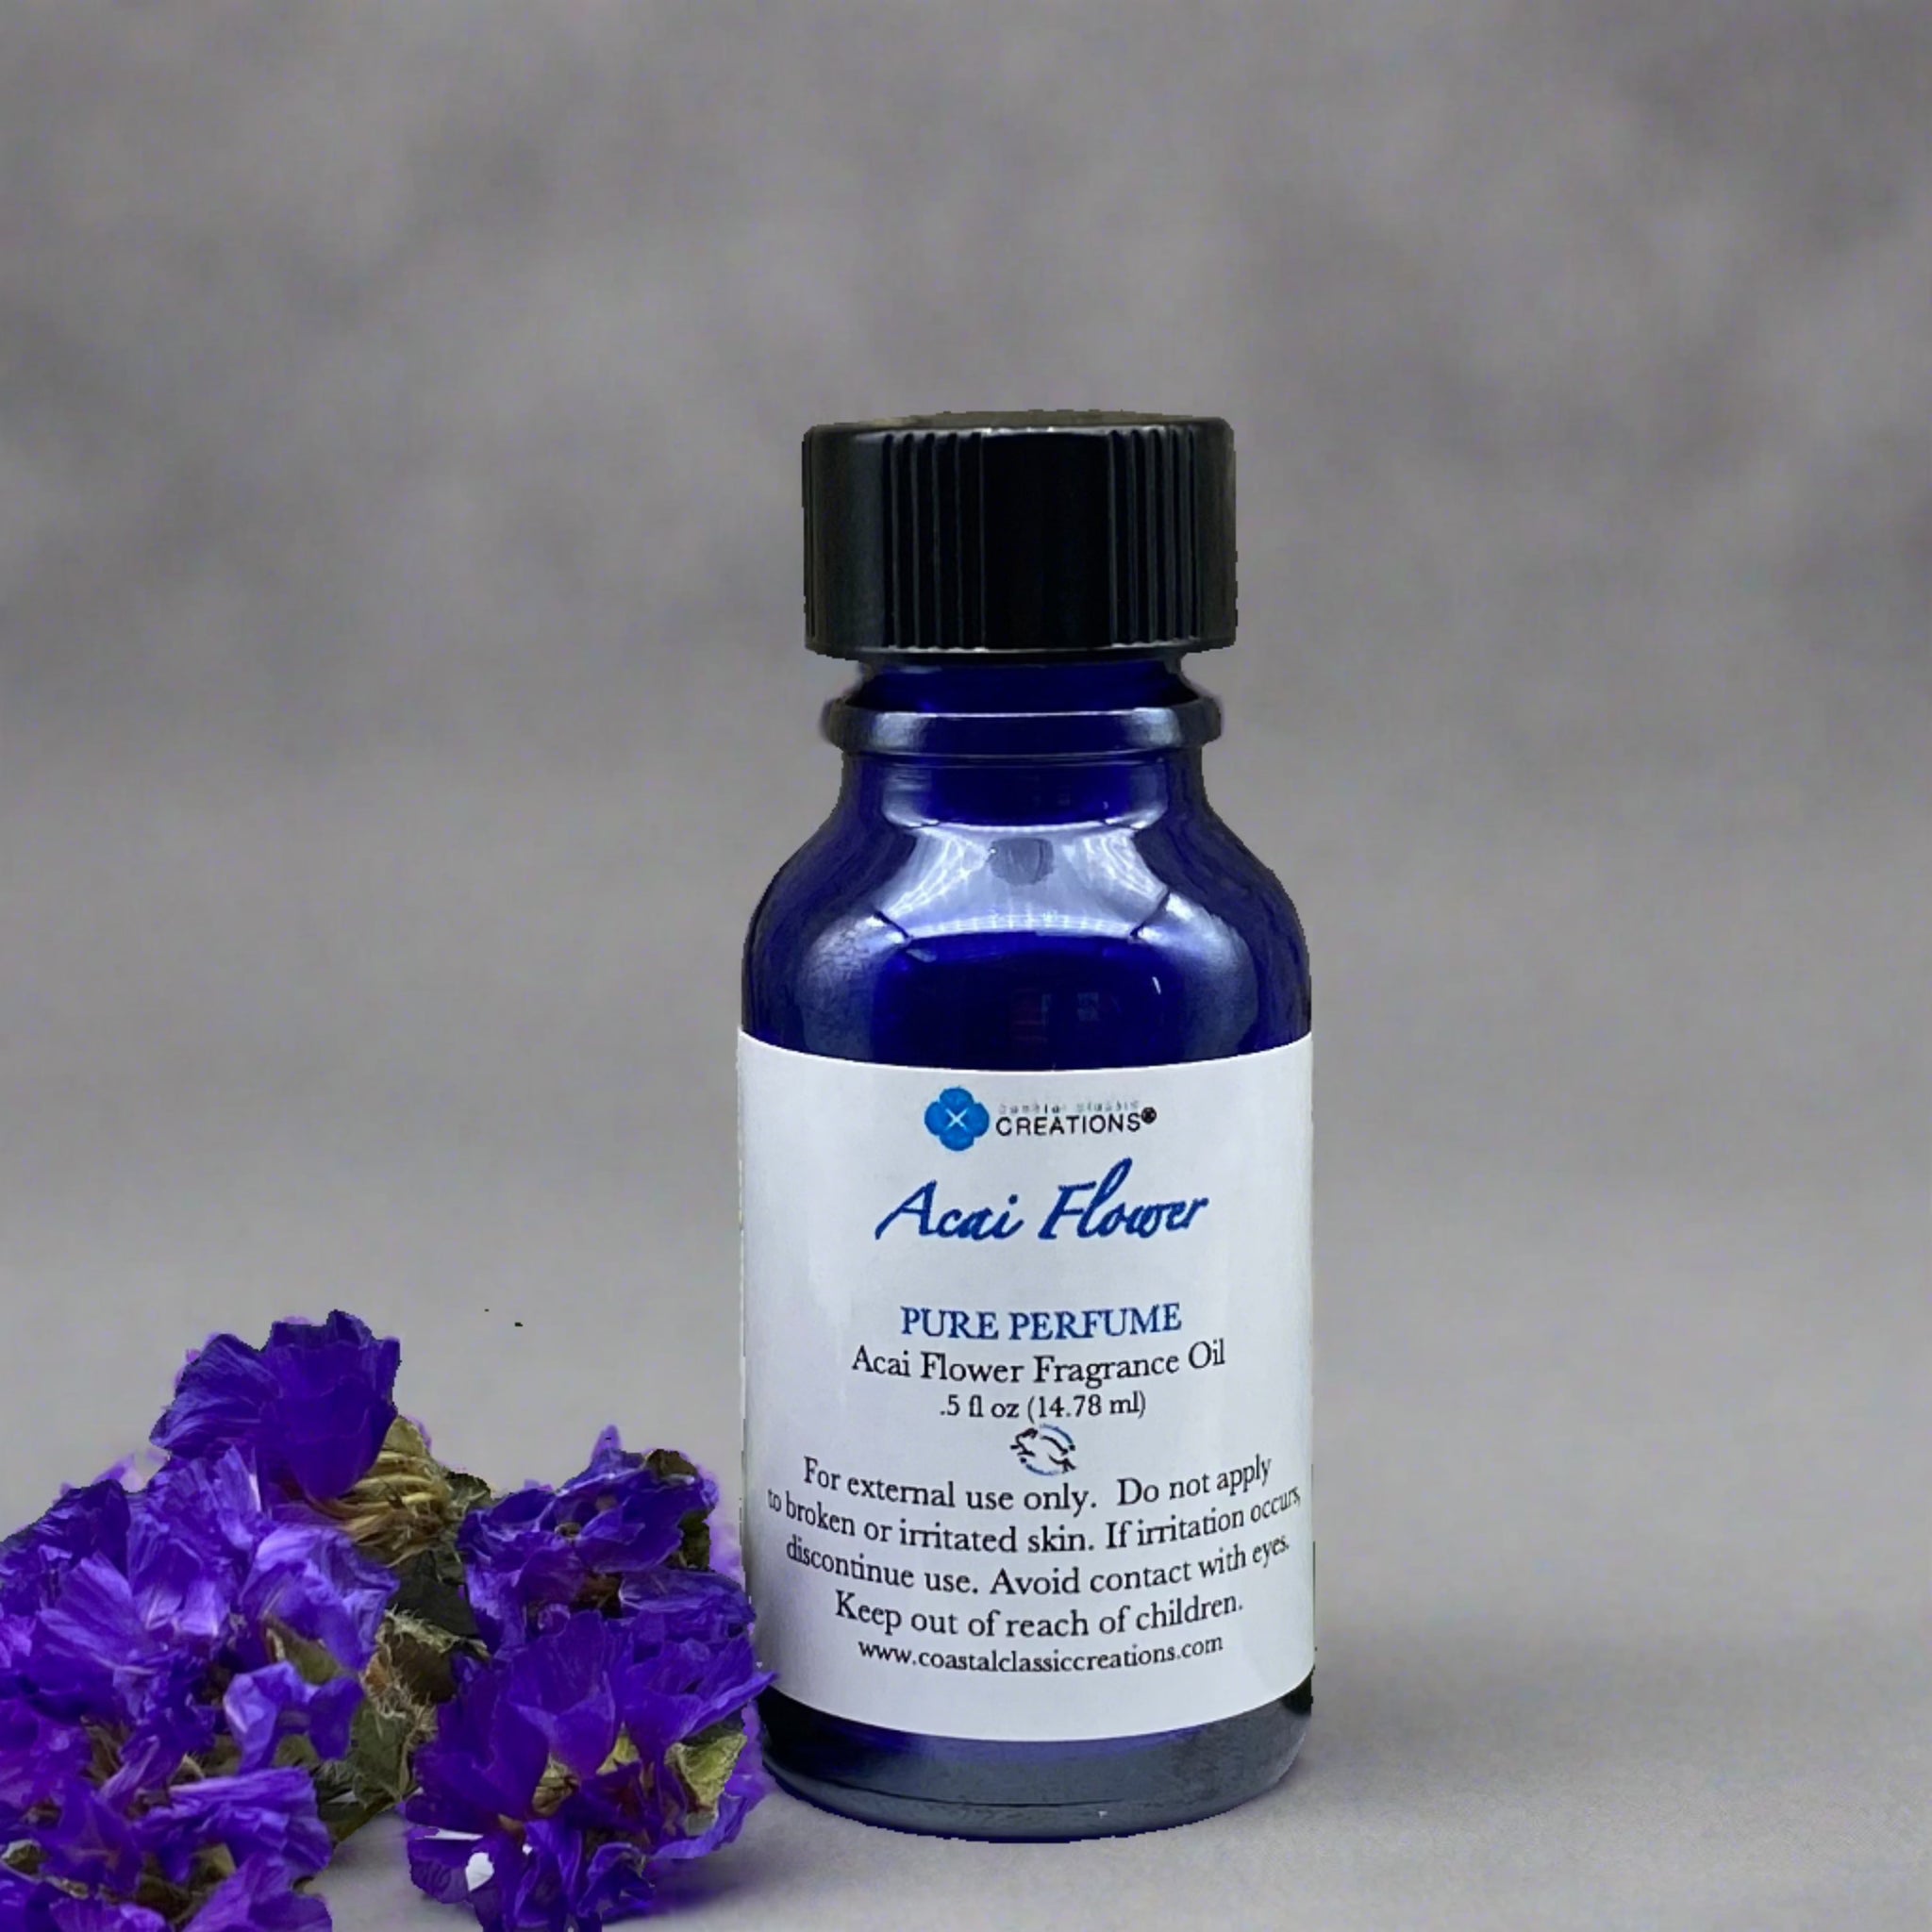 A bottle of acai perfume resting on a textured rock surface with a background of purple lattice. This aromatic perfume is infused with acai essence, ideal for aromatherapy enthusiasts seeking a revitalizing scent experience